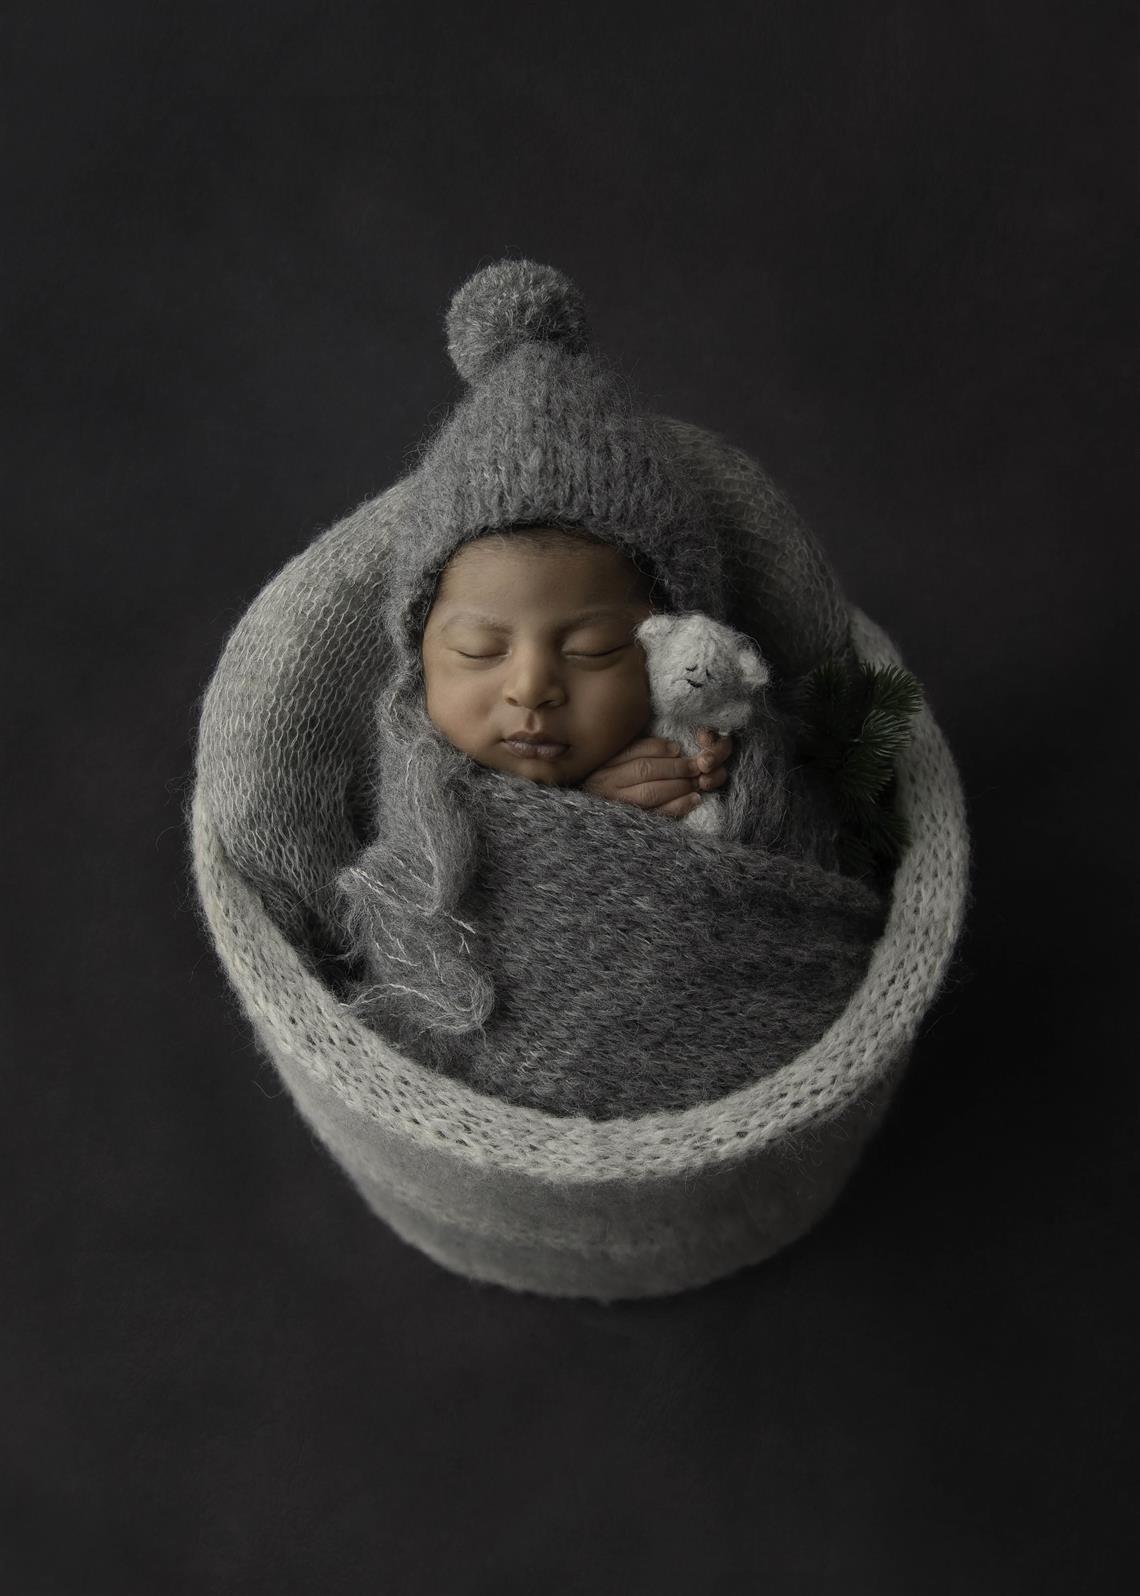 newborn photography community critique photo submitted by Nicole Calore - 0 community members set this photo as a favourite image.